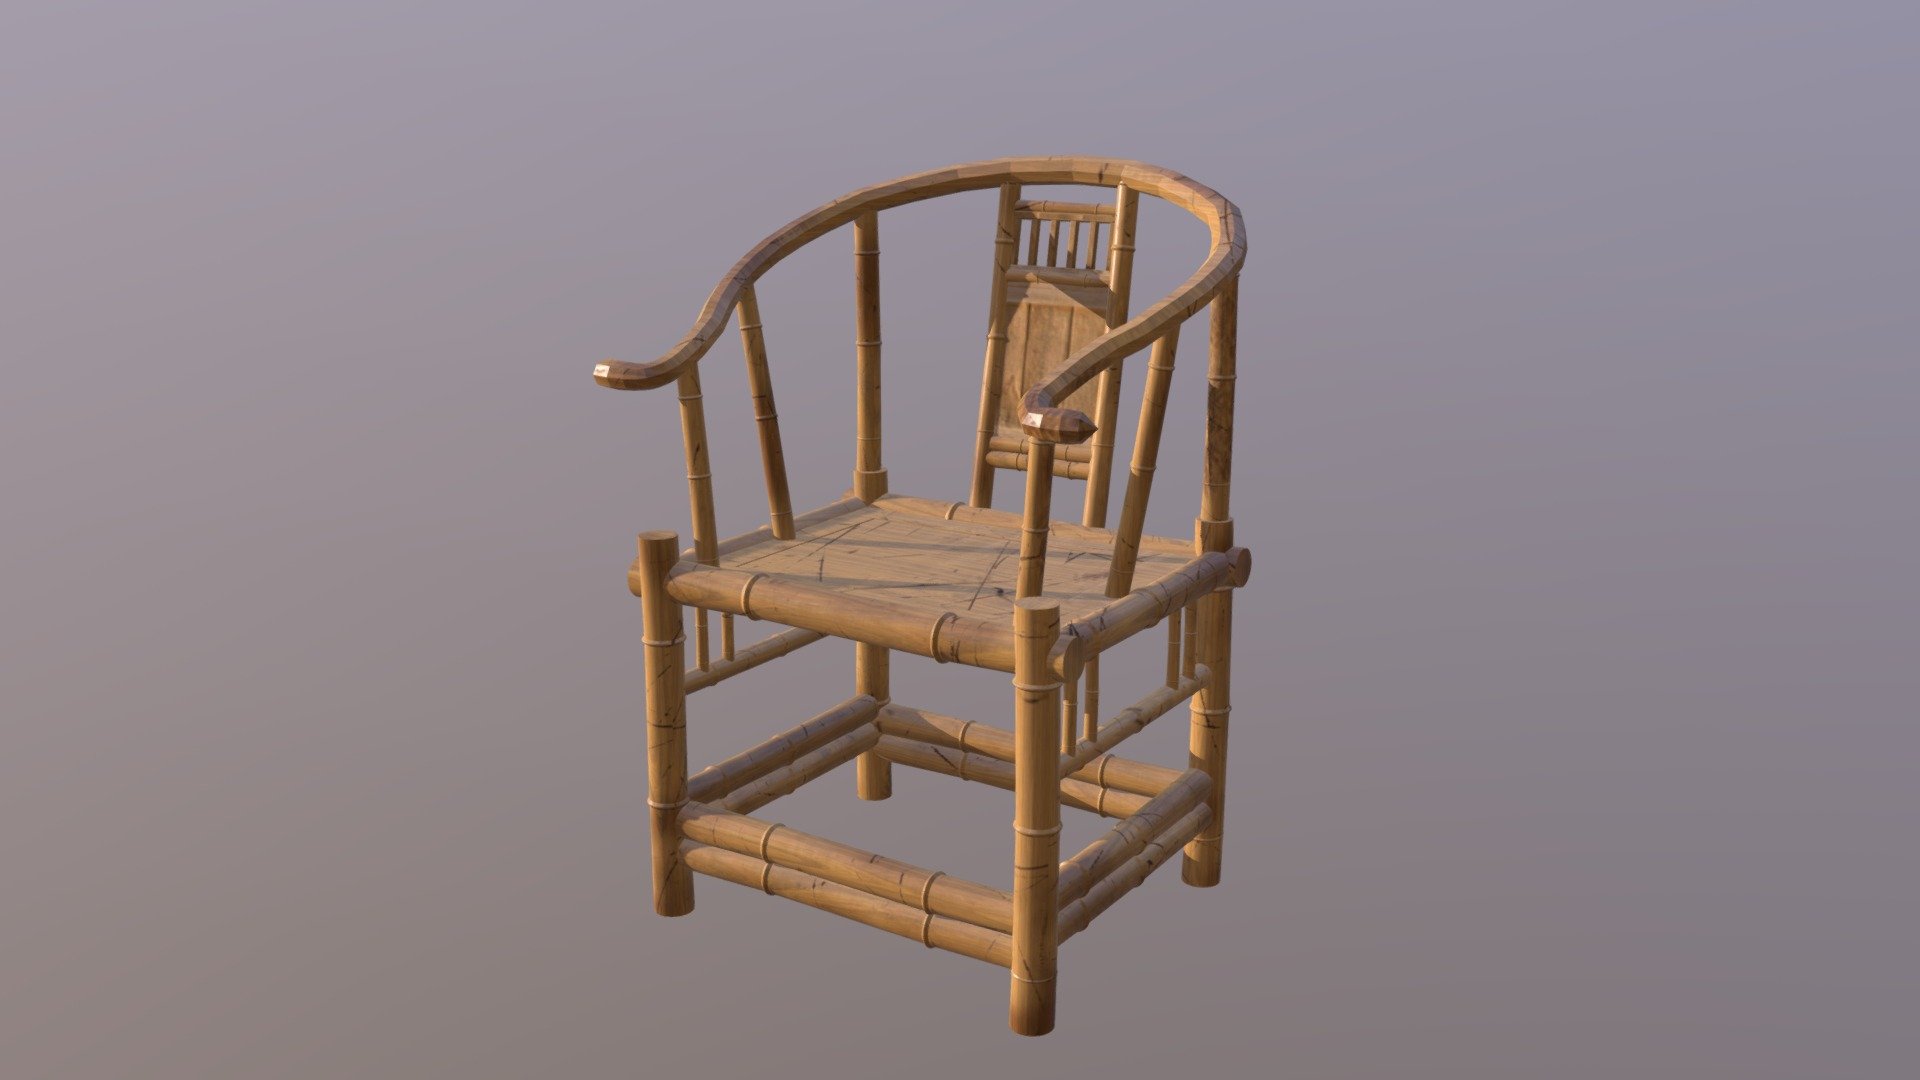 I made a chinese bamboo chair - Bamboo Chair - 3D model by wang2dog 3d model